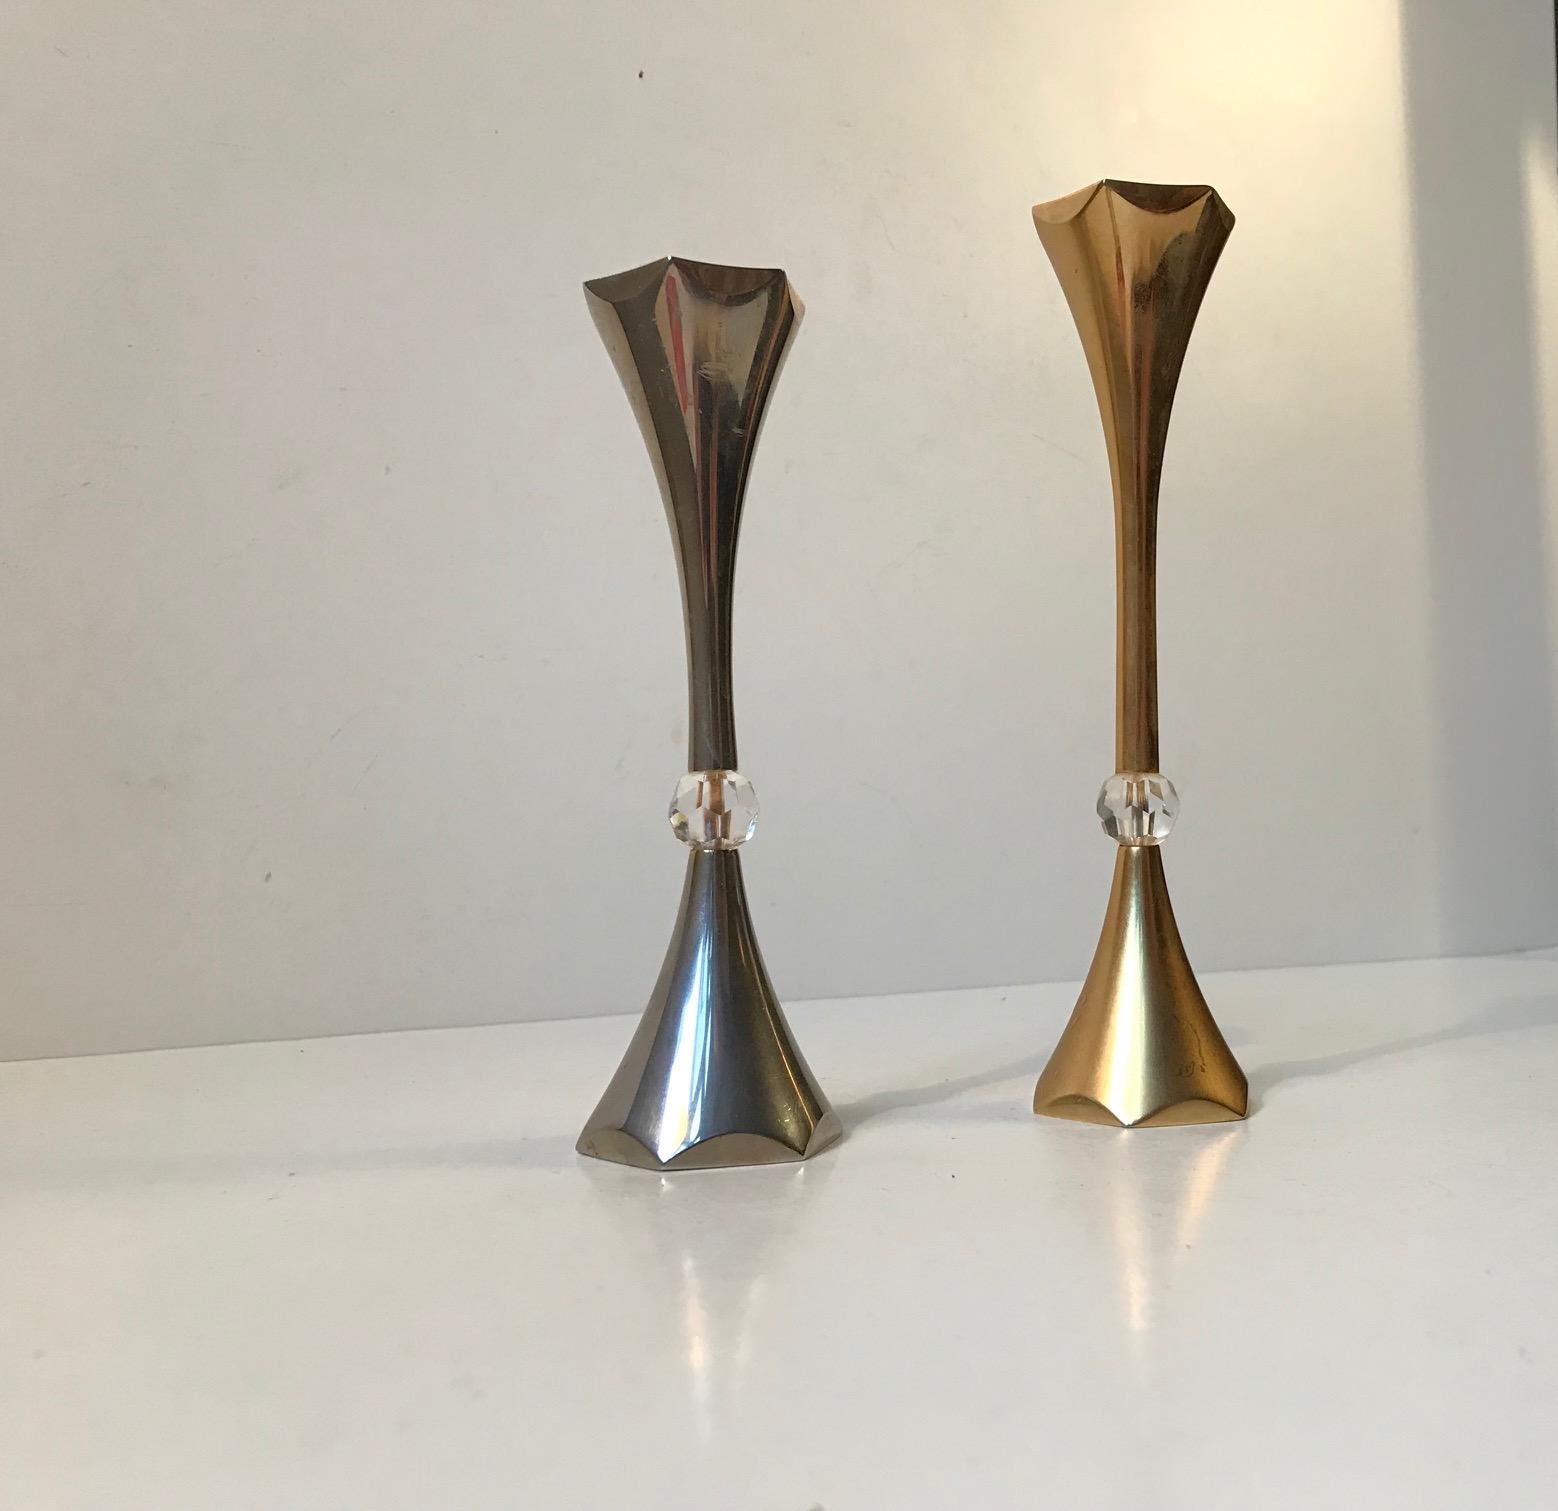 - A pair of 24-carat gold-plated candleholders with faceted crystal beads
- One is in yellow gold plating and one in white
- Designed by Hugo Asmussen
- Manufactured by the Asmussen company in Denmark during the 1960s
- They are suited for